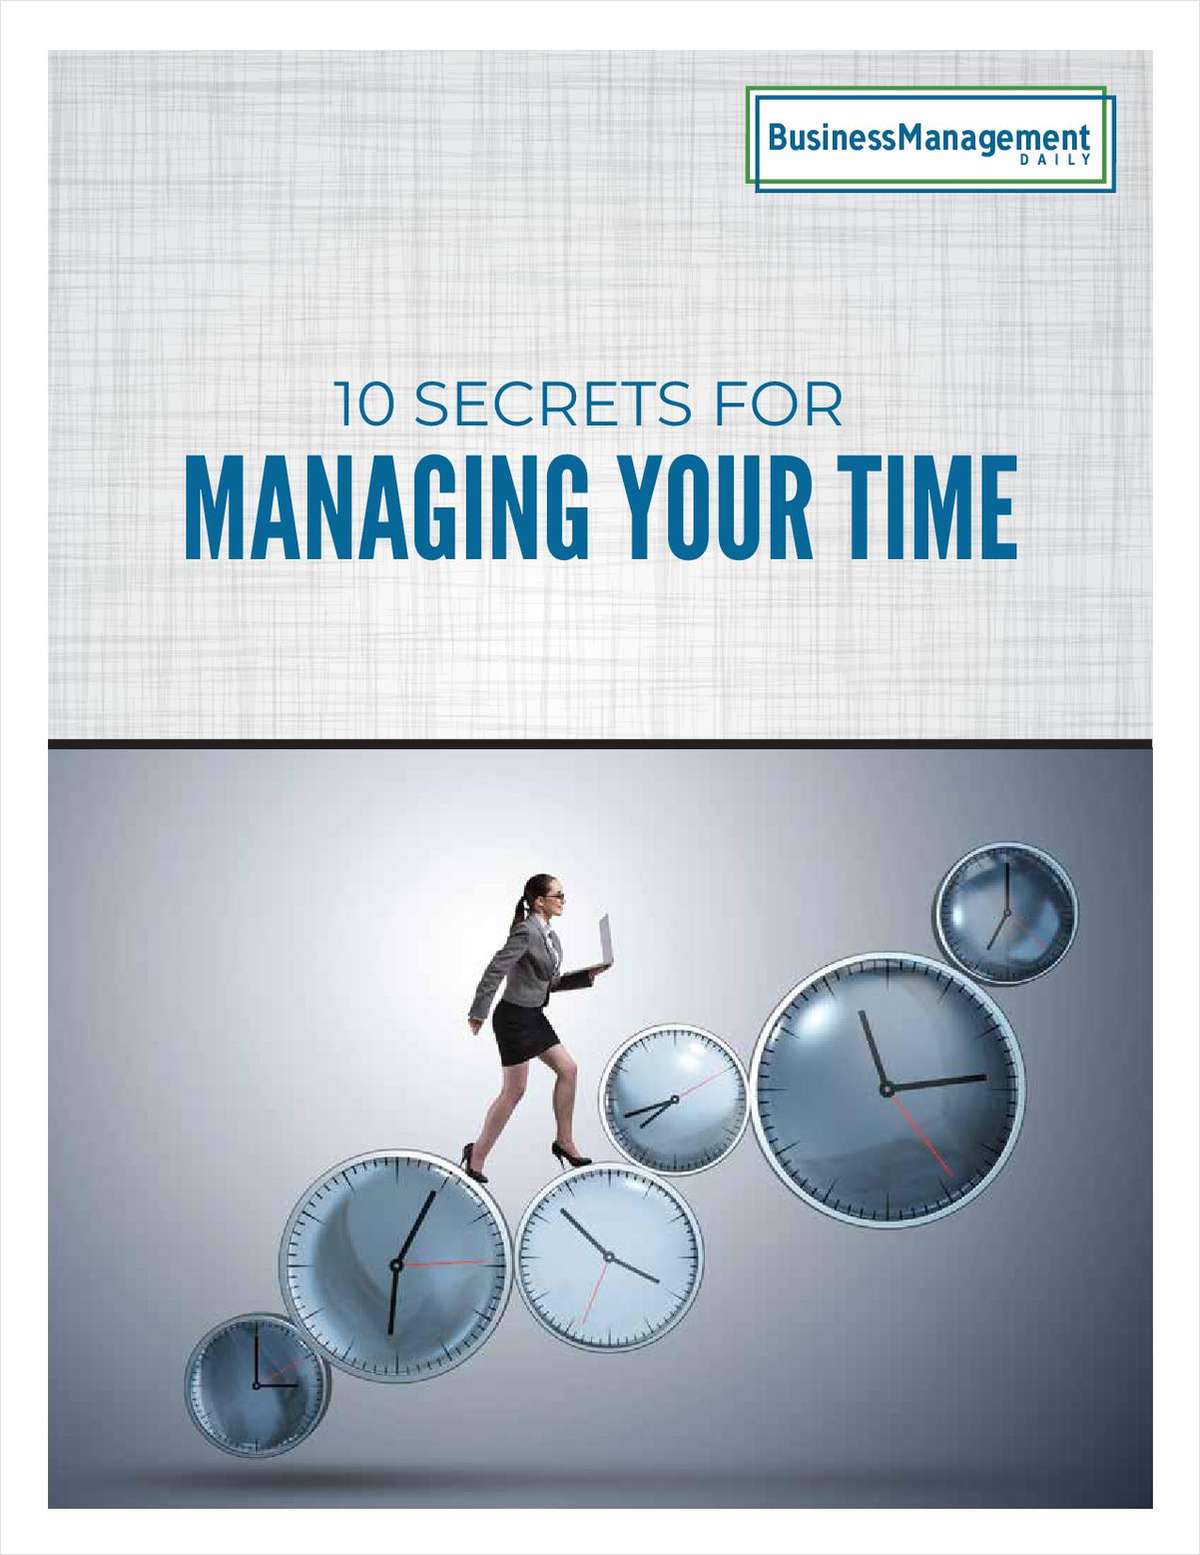 10 Secrets For Managing Your Time